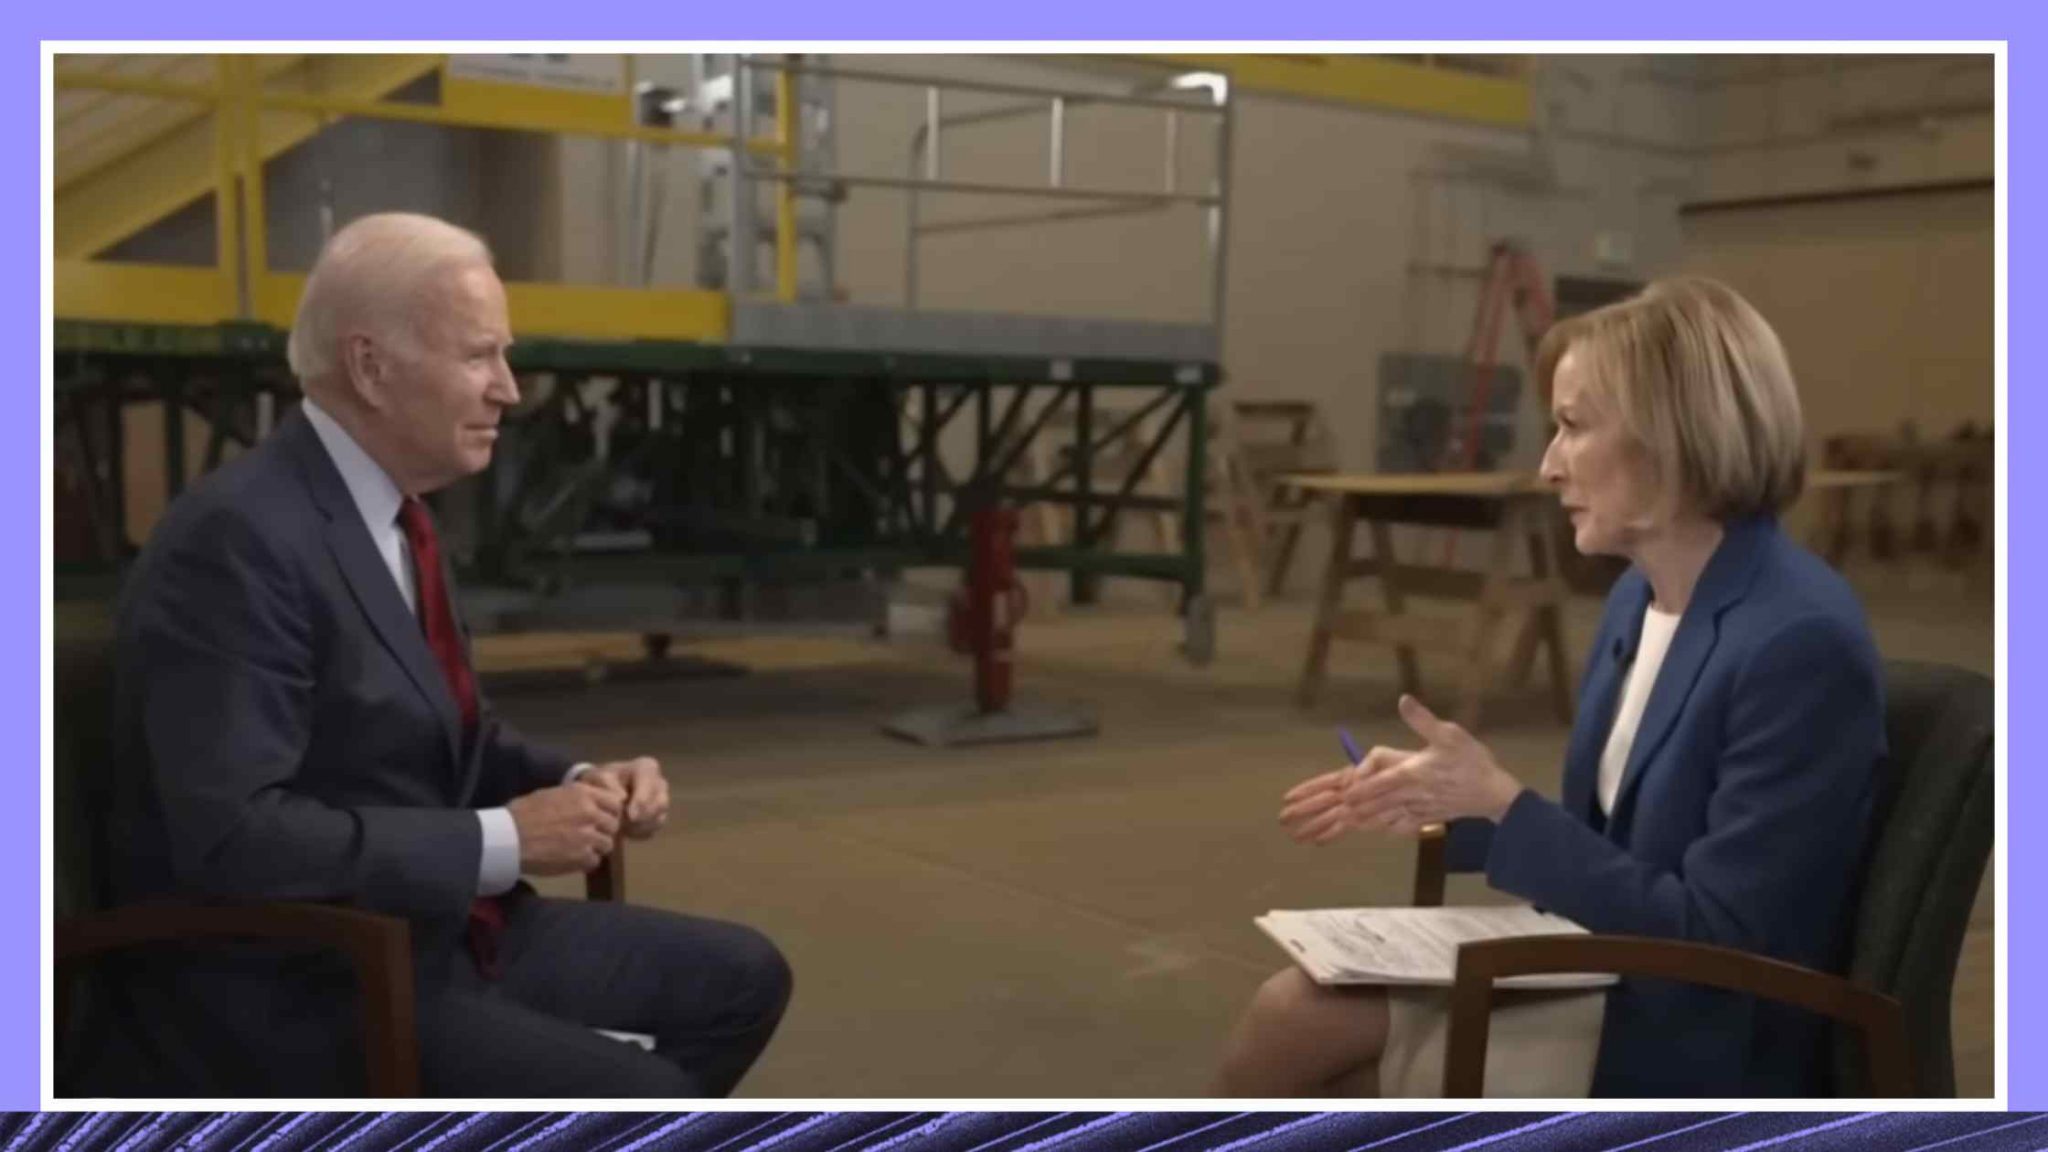 Biden Talks Economy, China, and Political Division in Interview With Judy Woodruff Transcript